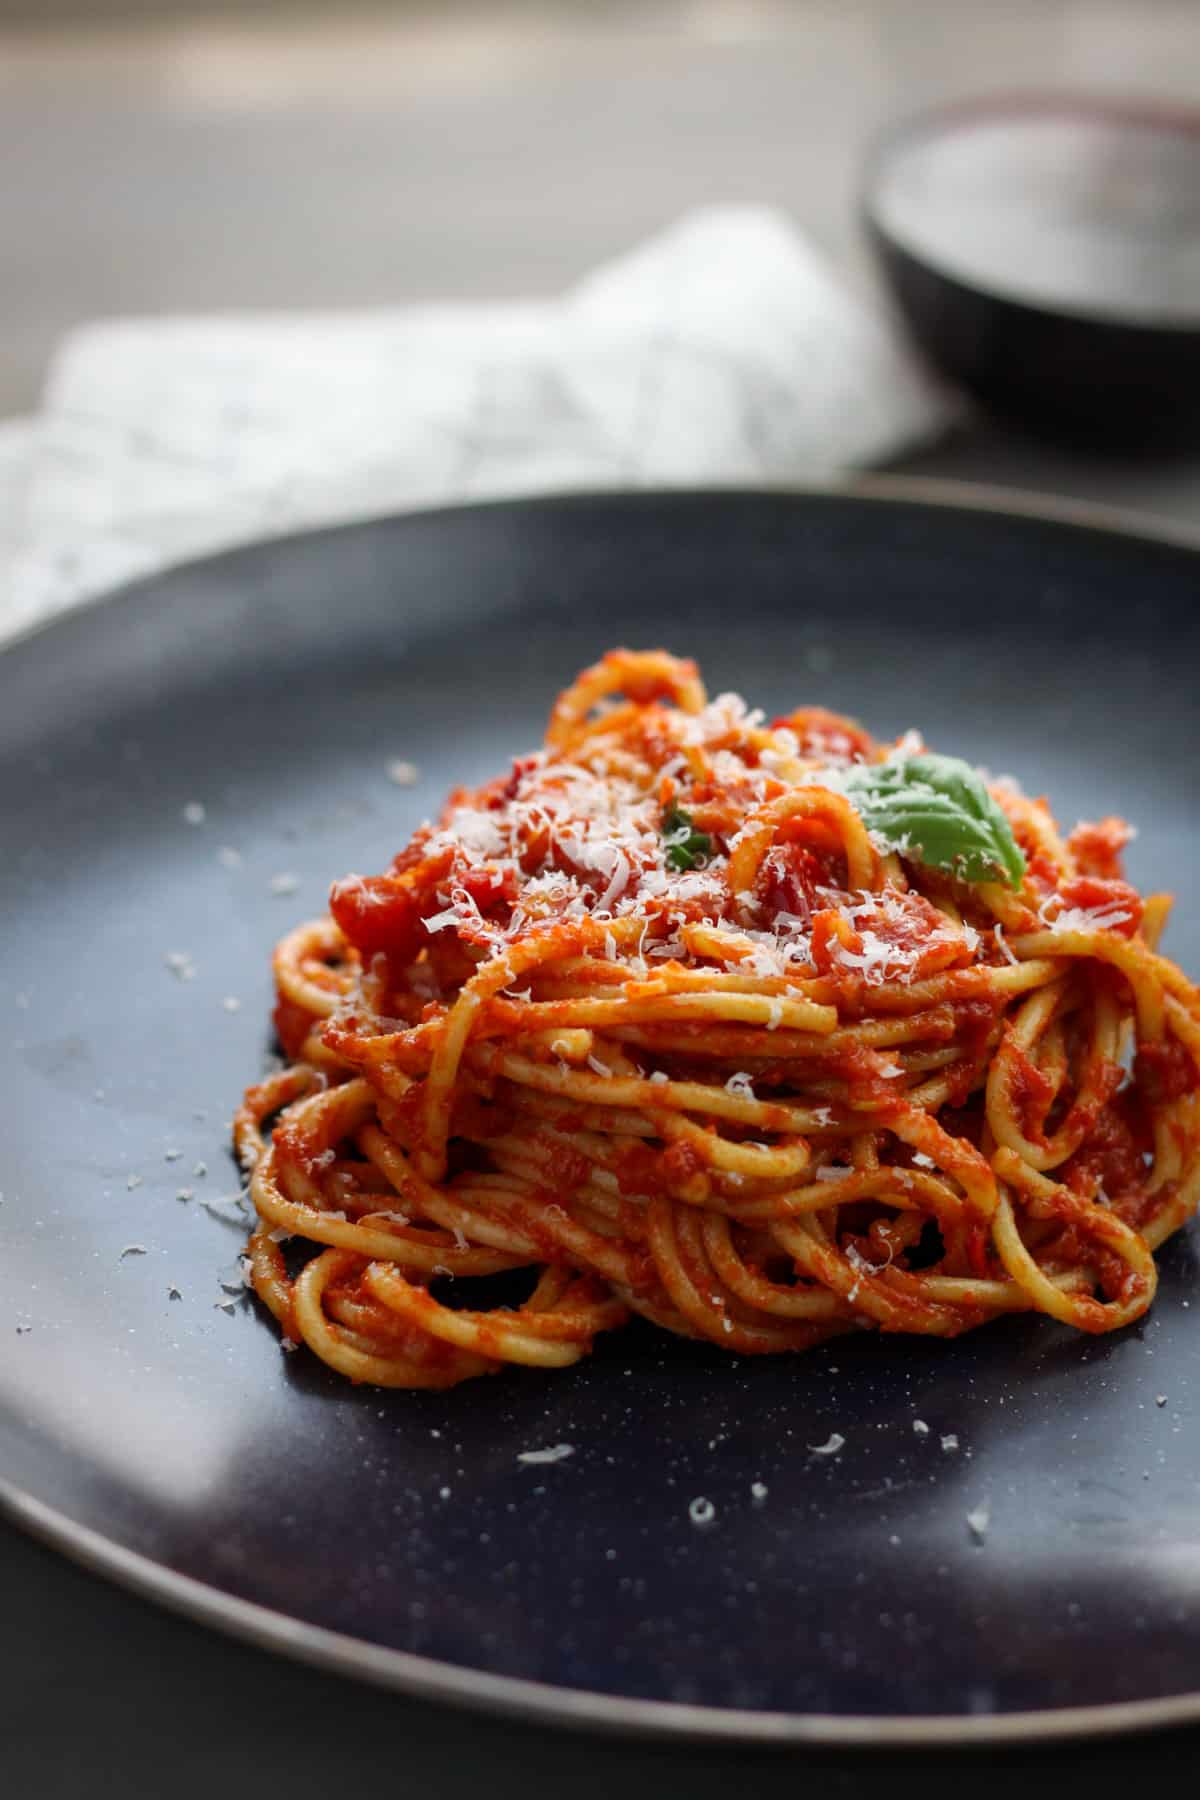 A plate of spaghetti arrabiata topped with basil and grated parmesan.